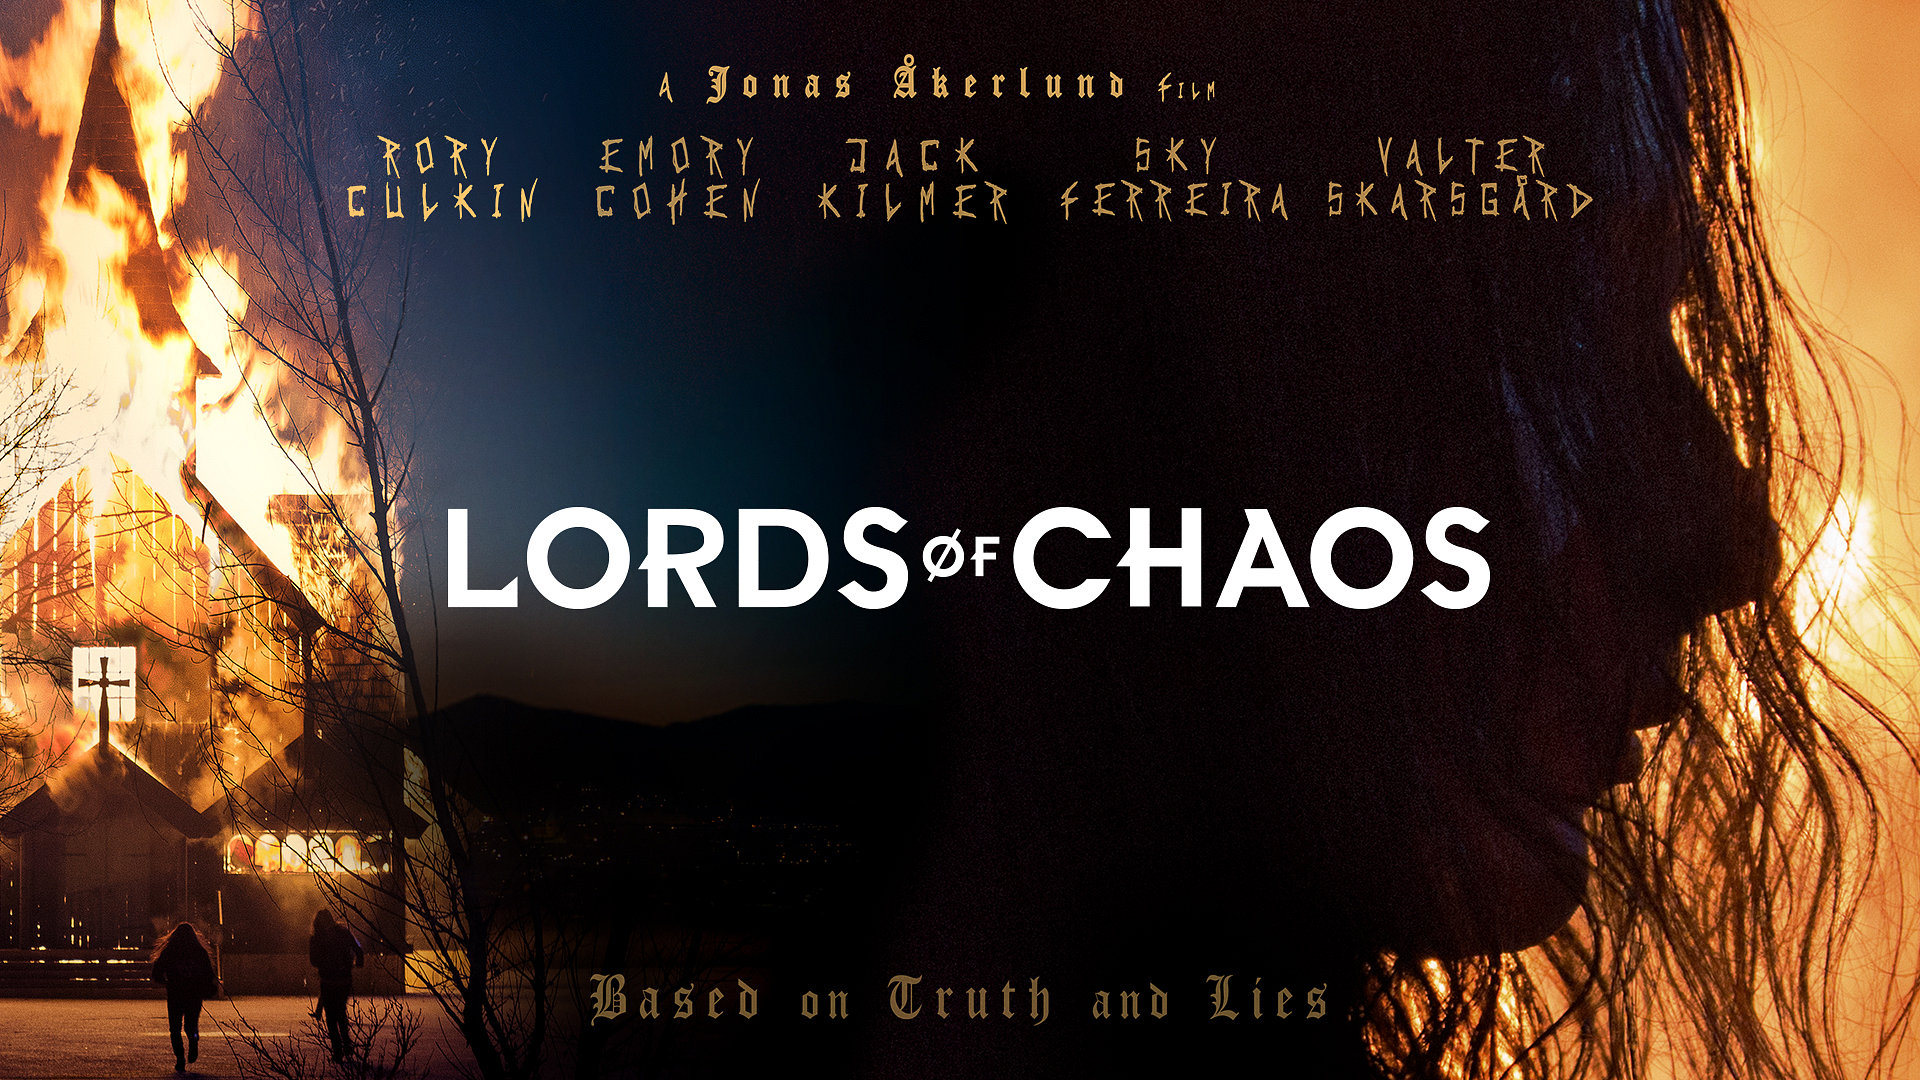 Lords Of Chaos